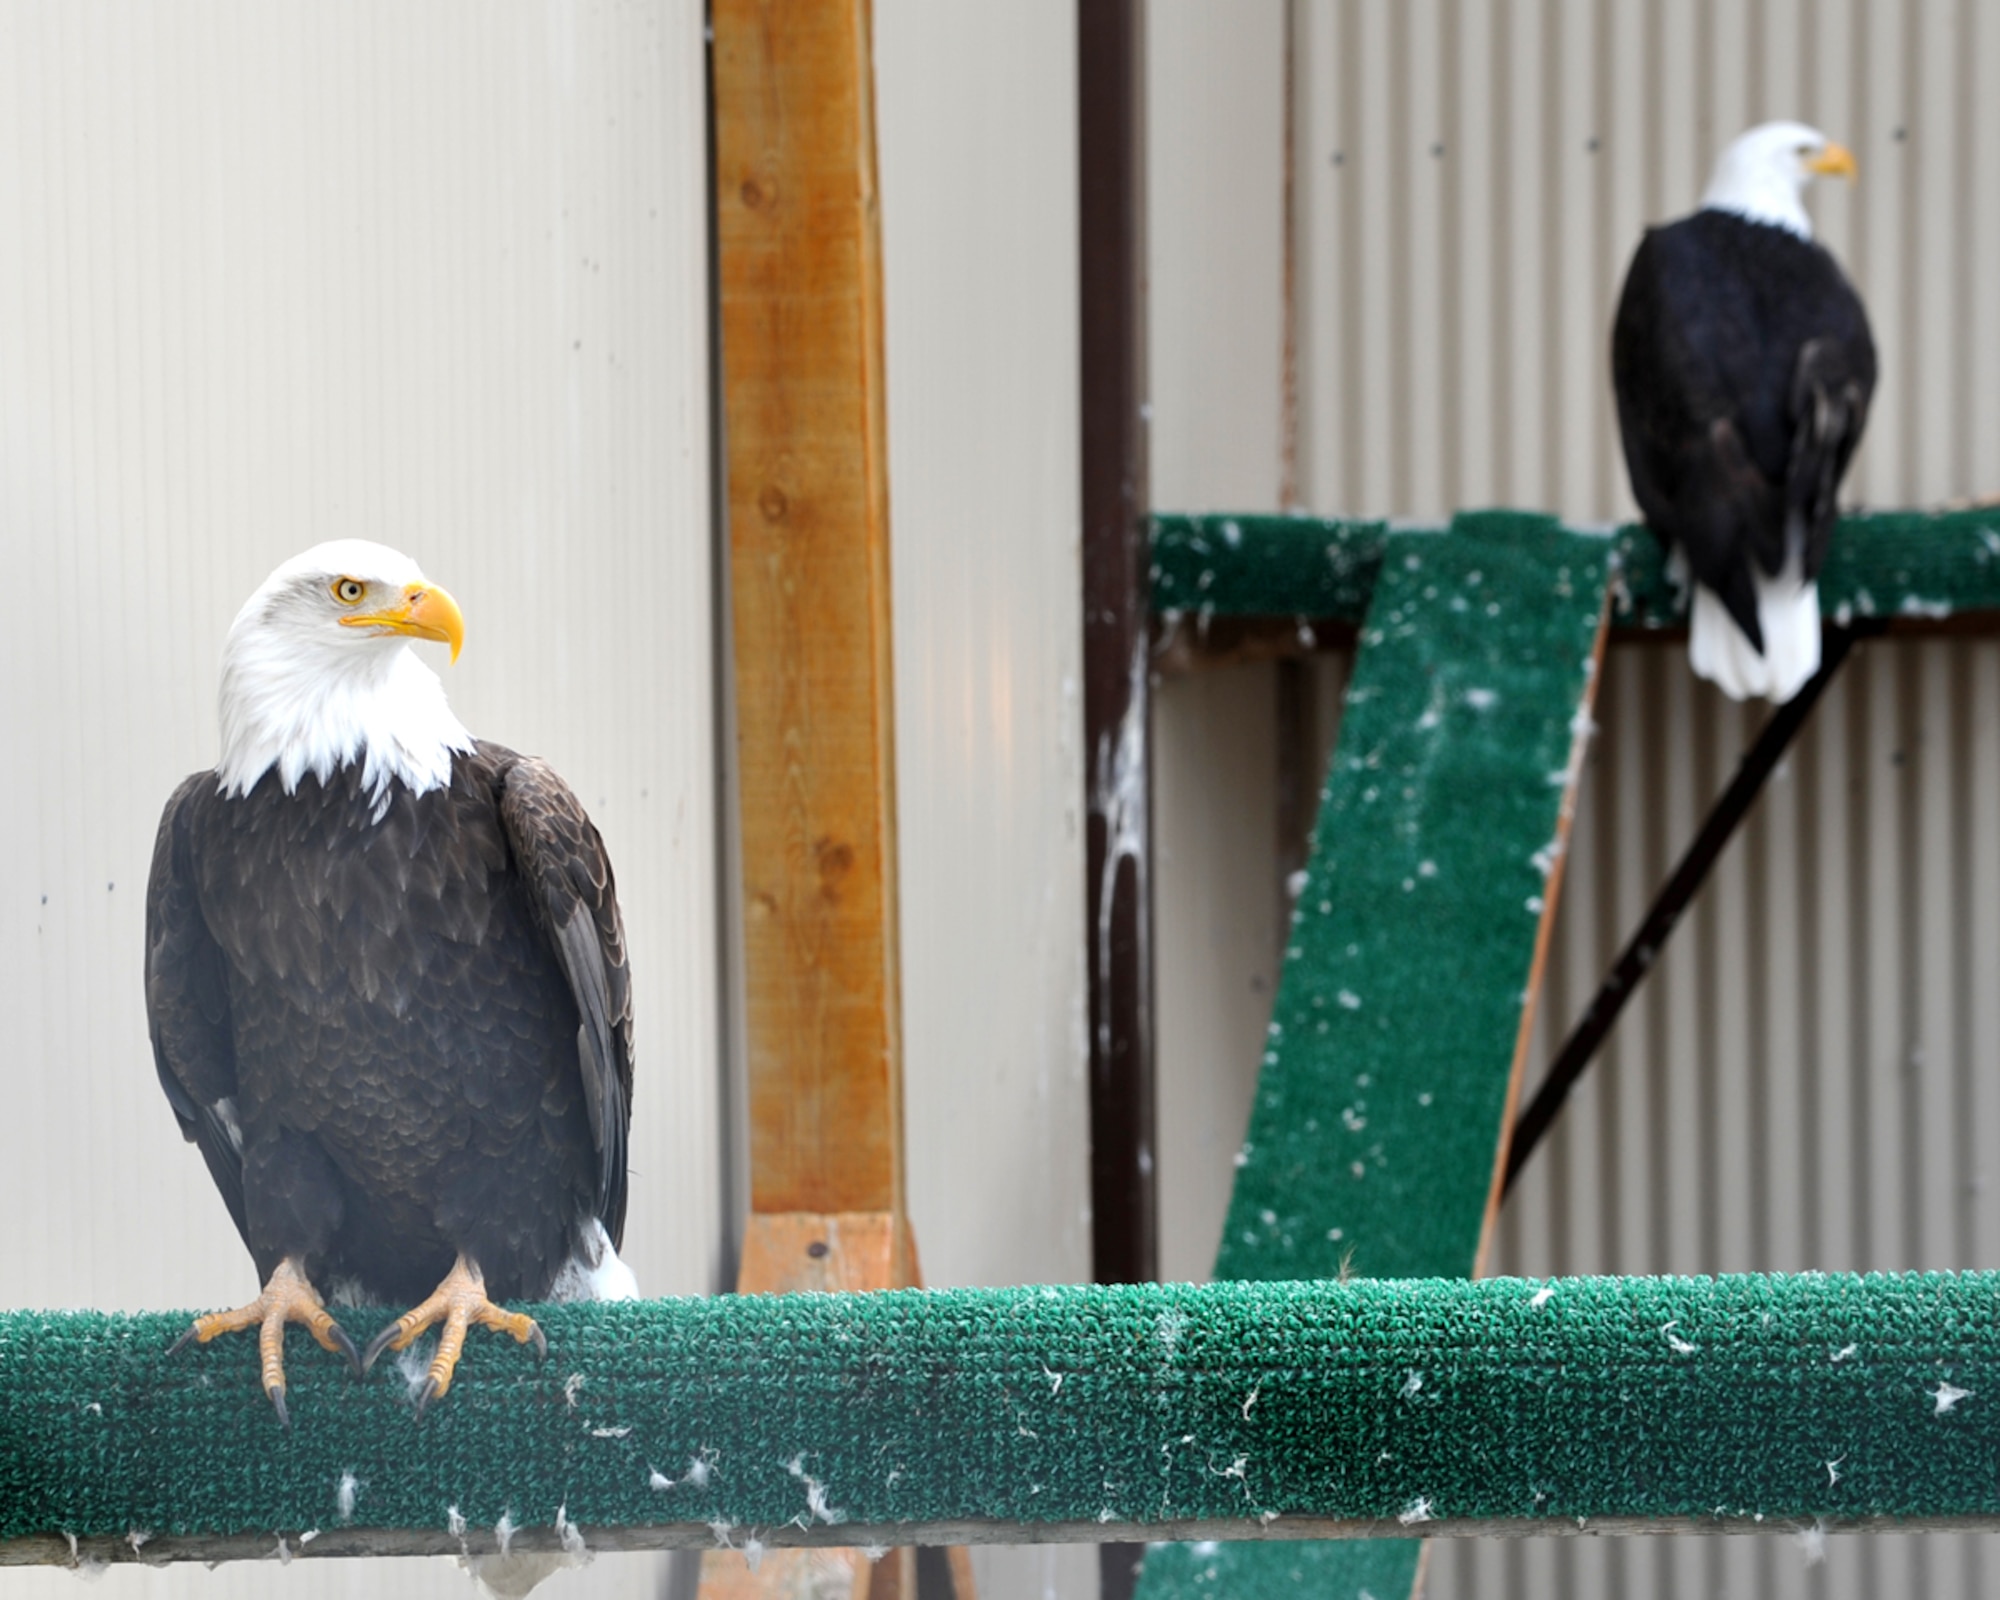 130511-F-IY975-001: JOINT BASE ELMENDORF-RICHARDSON, Alaska ??? Notch Wing and One-Eyed Jack, the Bald Eagles that reside in the Joint Base Elmendorf-Richardson eagle cage, sit on their perch May 11. A group of volunteers maintains the cage and cares for the eagles, which have been injured and are not able to survive in the wild. (U.S. Air Force photo/Senior Airman Blake Mize)